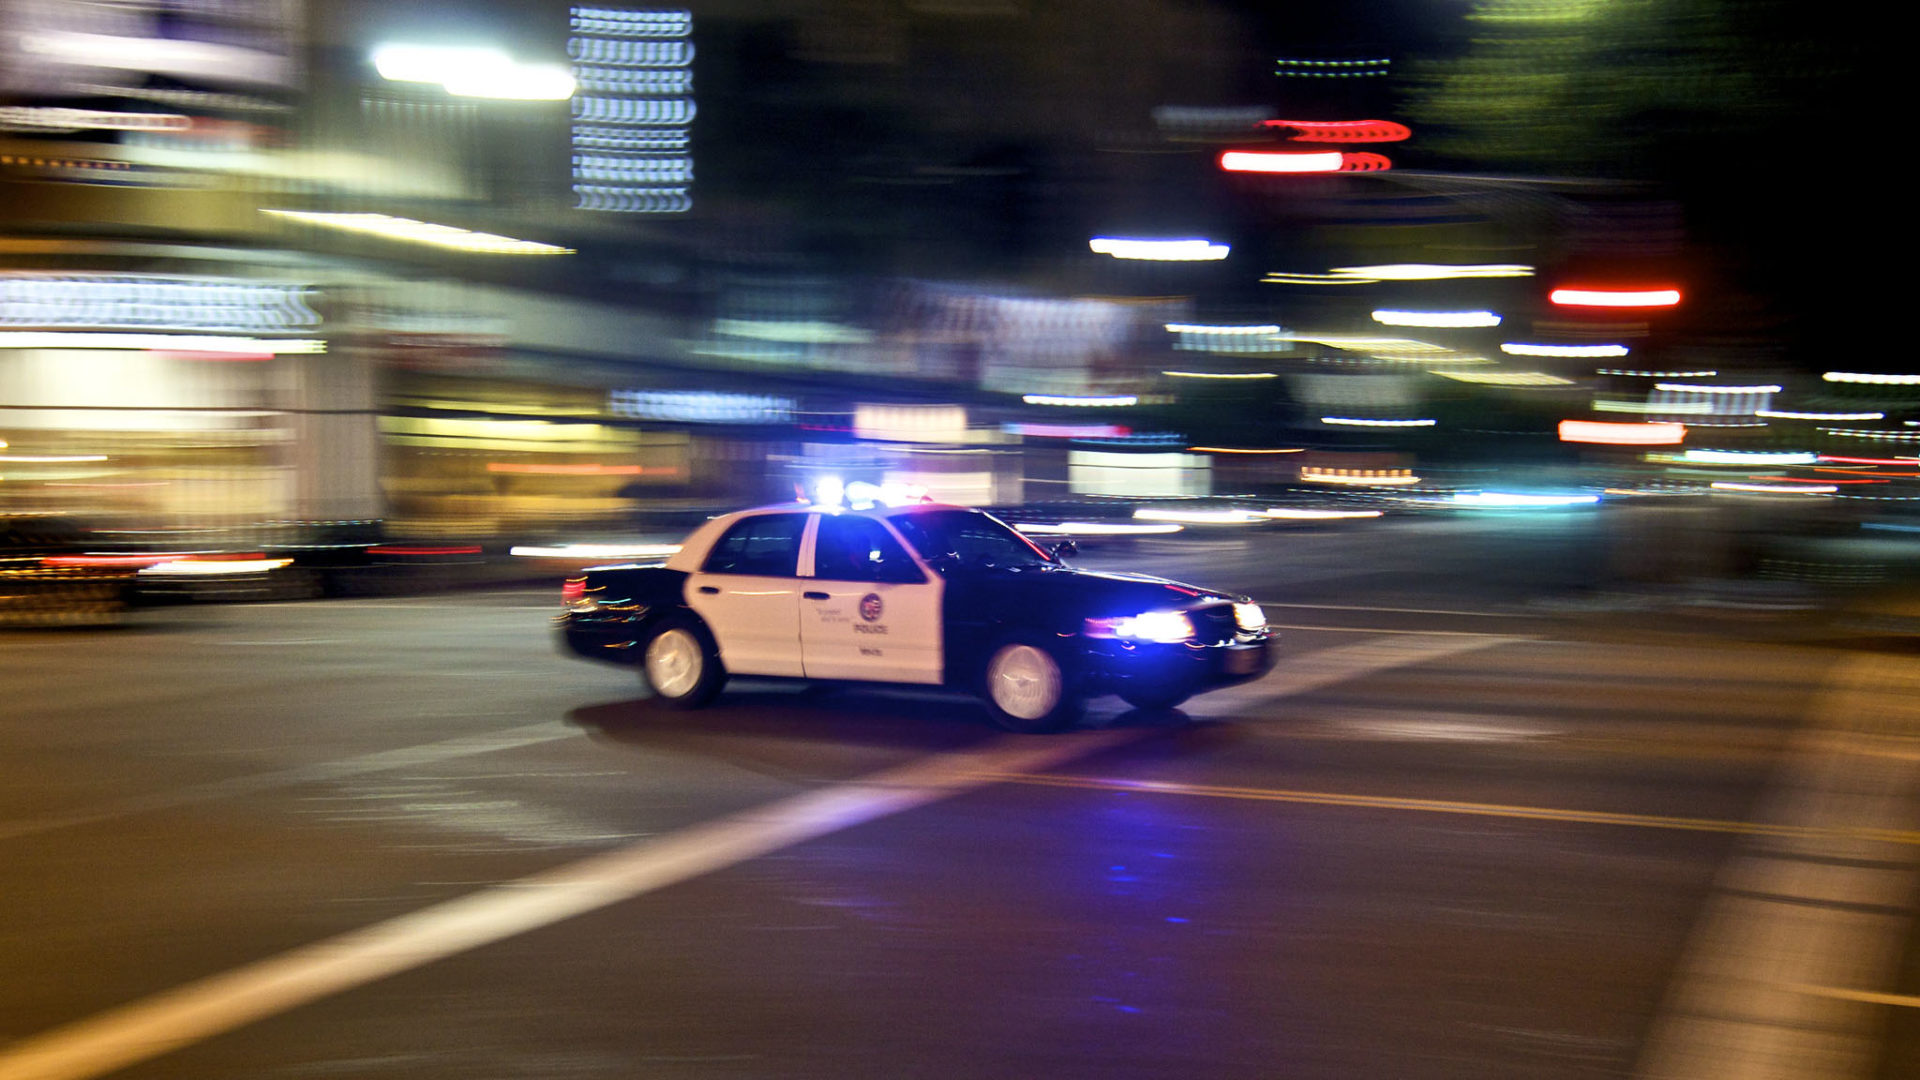 A Los Angeles Police Department vehicle drives down Sunset Boulevard with sirens flashing.